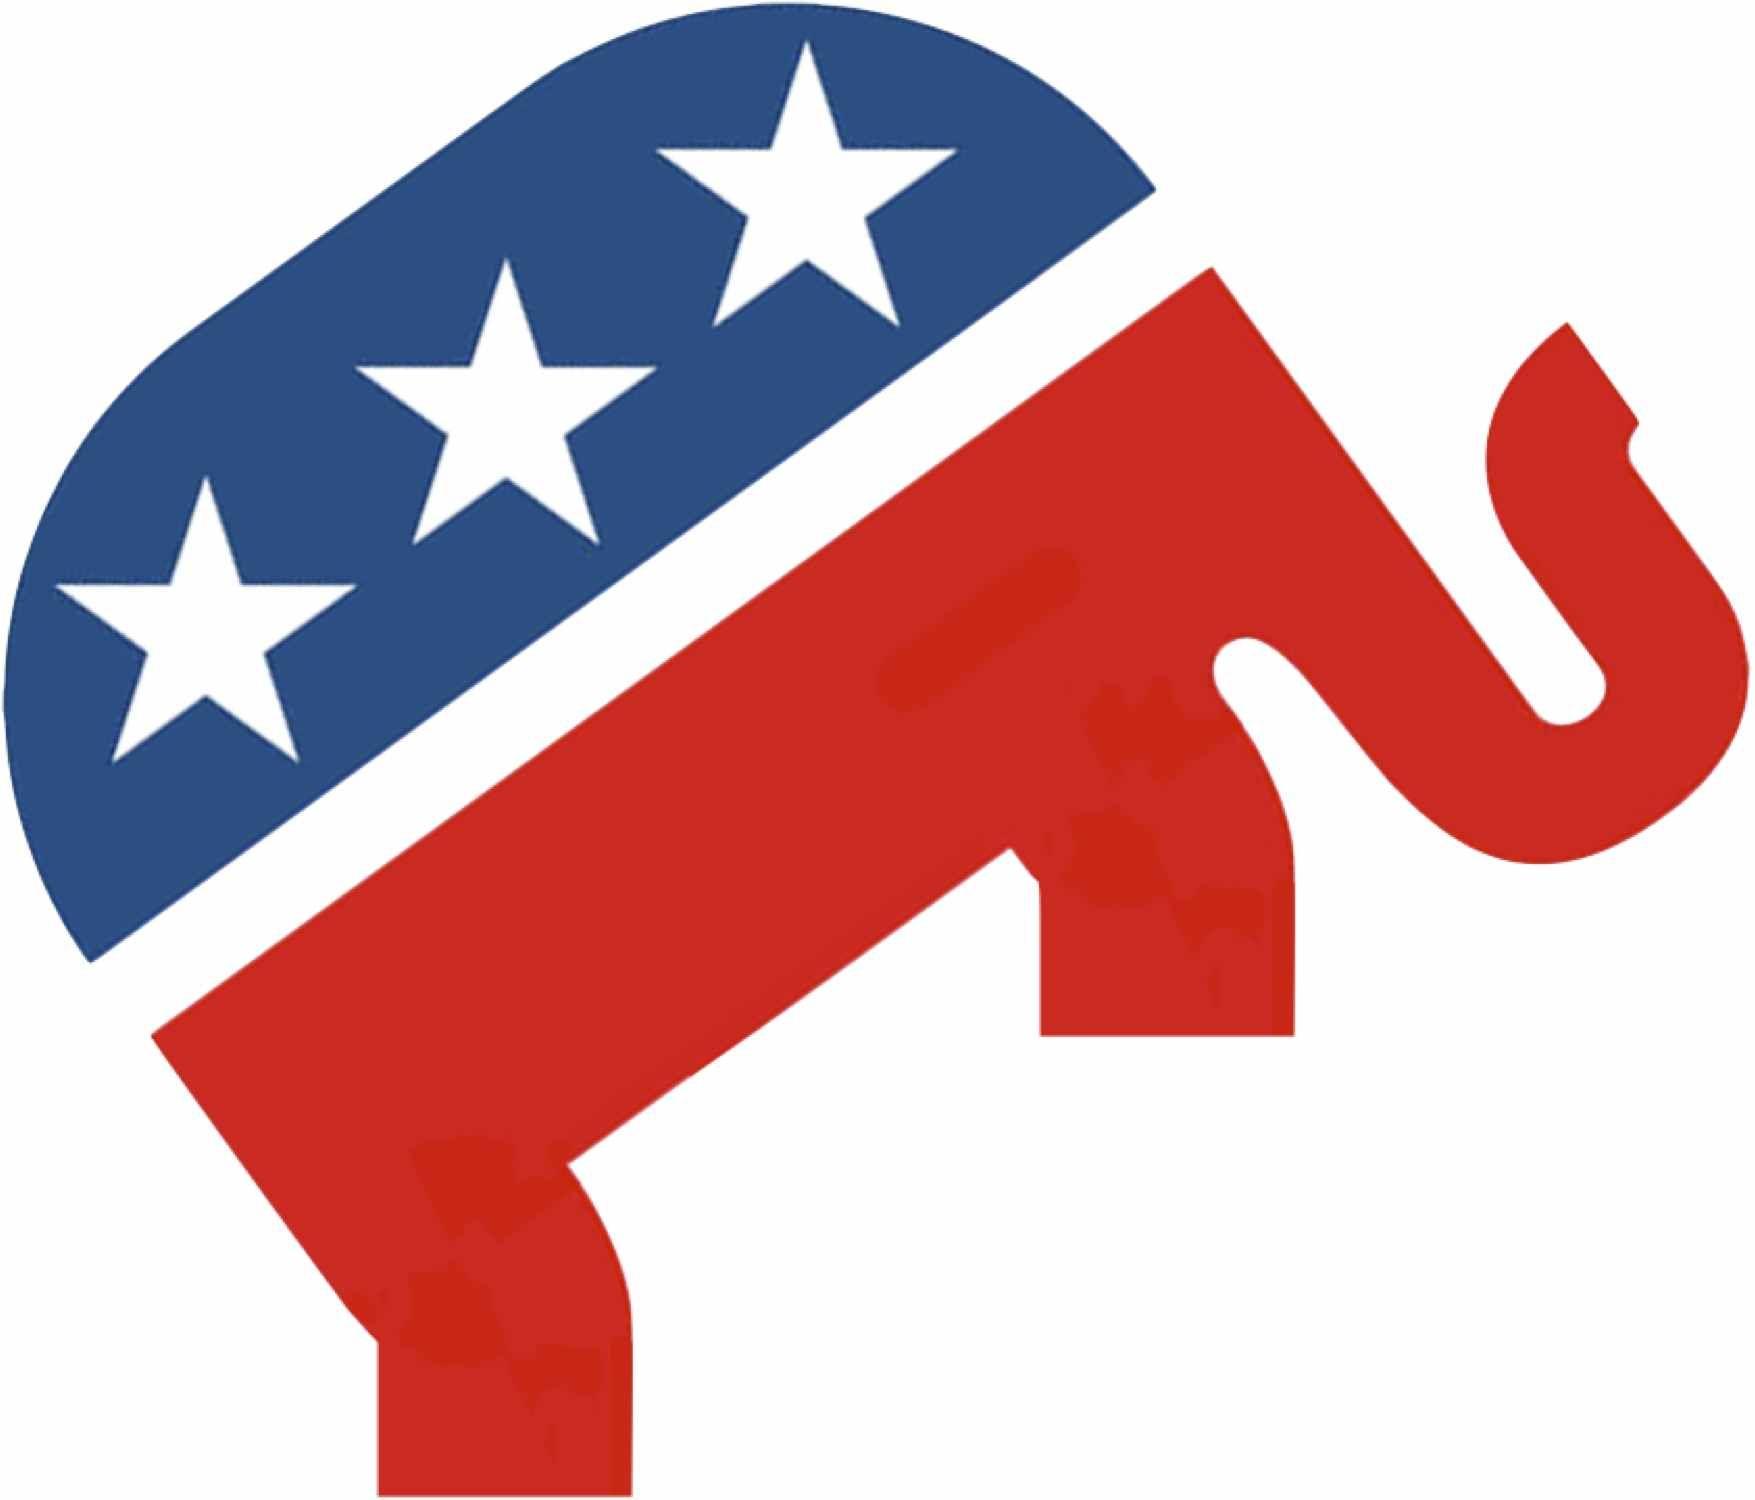 Republican Logo - Free Picture Of Republican Elephant, Download Free Clip Art, Free ...